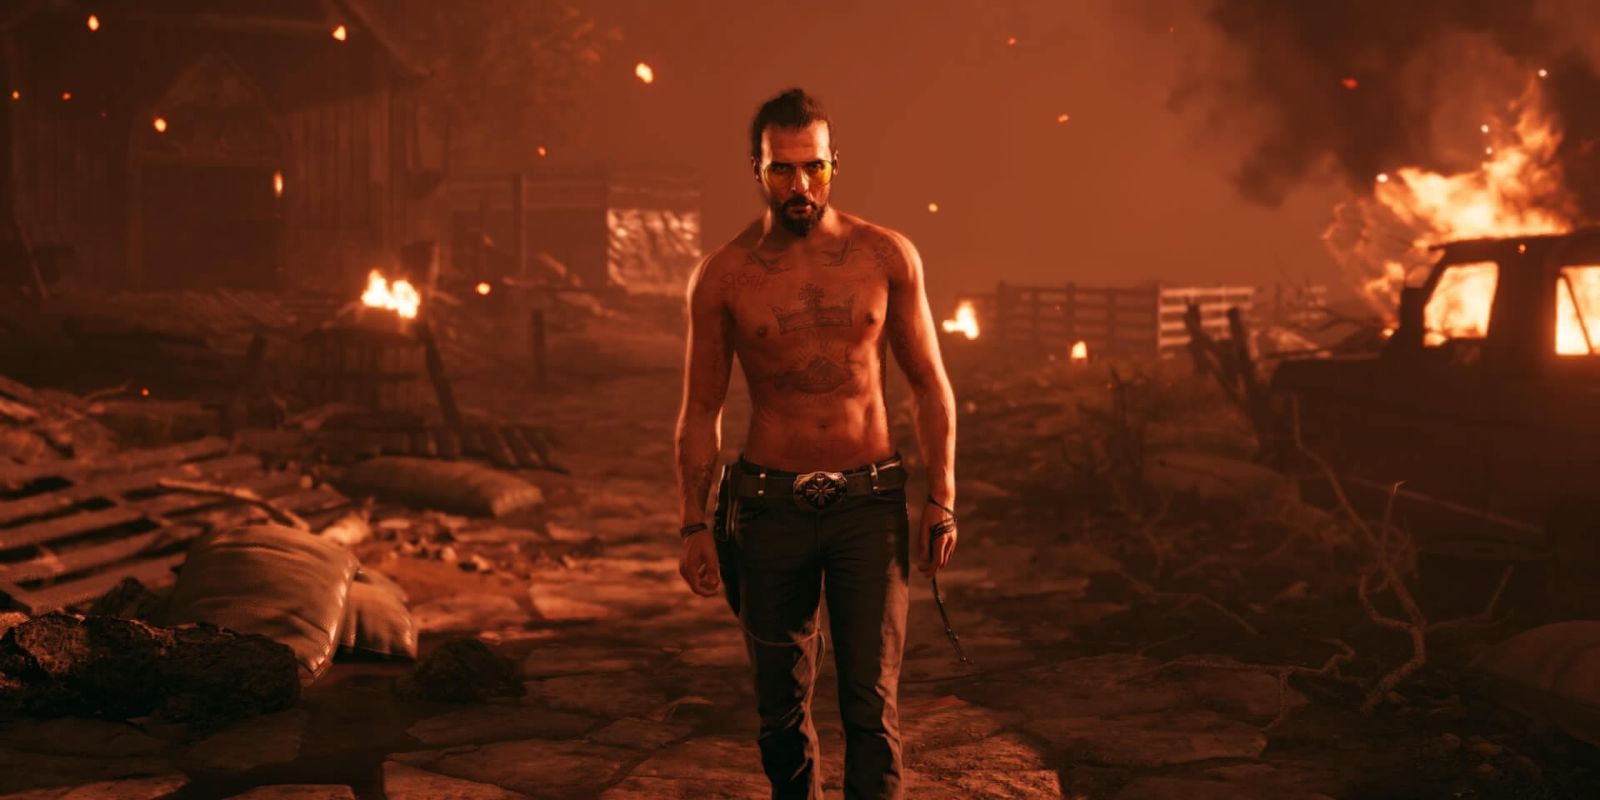 Just beat far cry 5, that's a terrible ending. : r/farcry